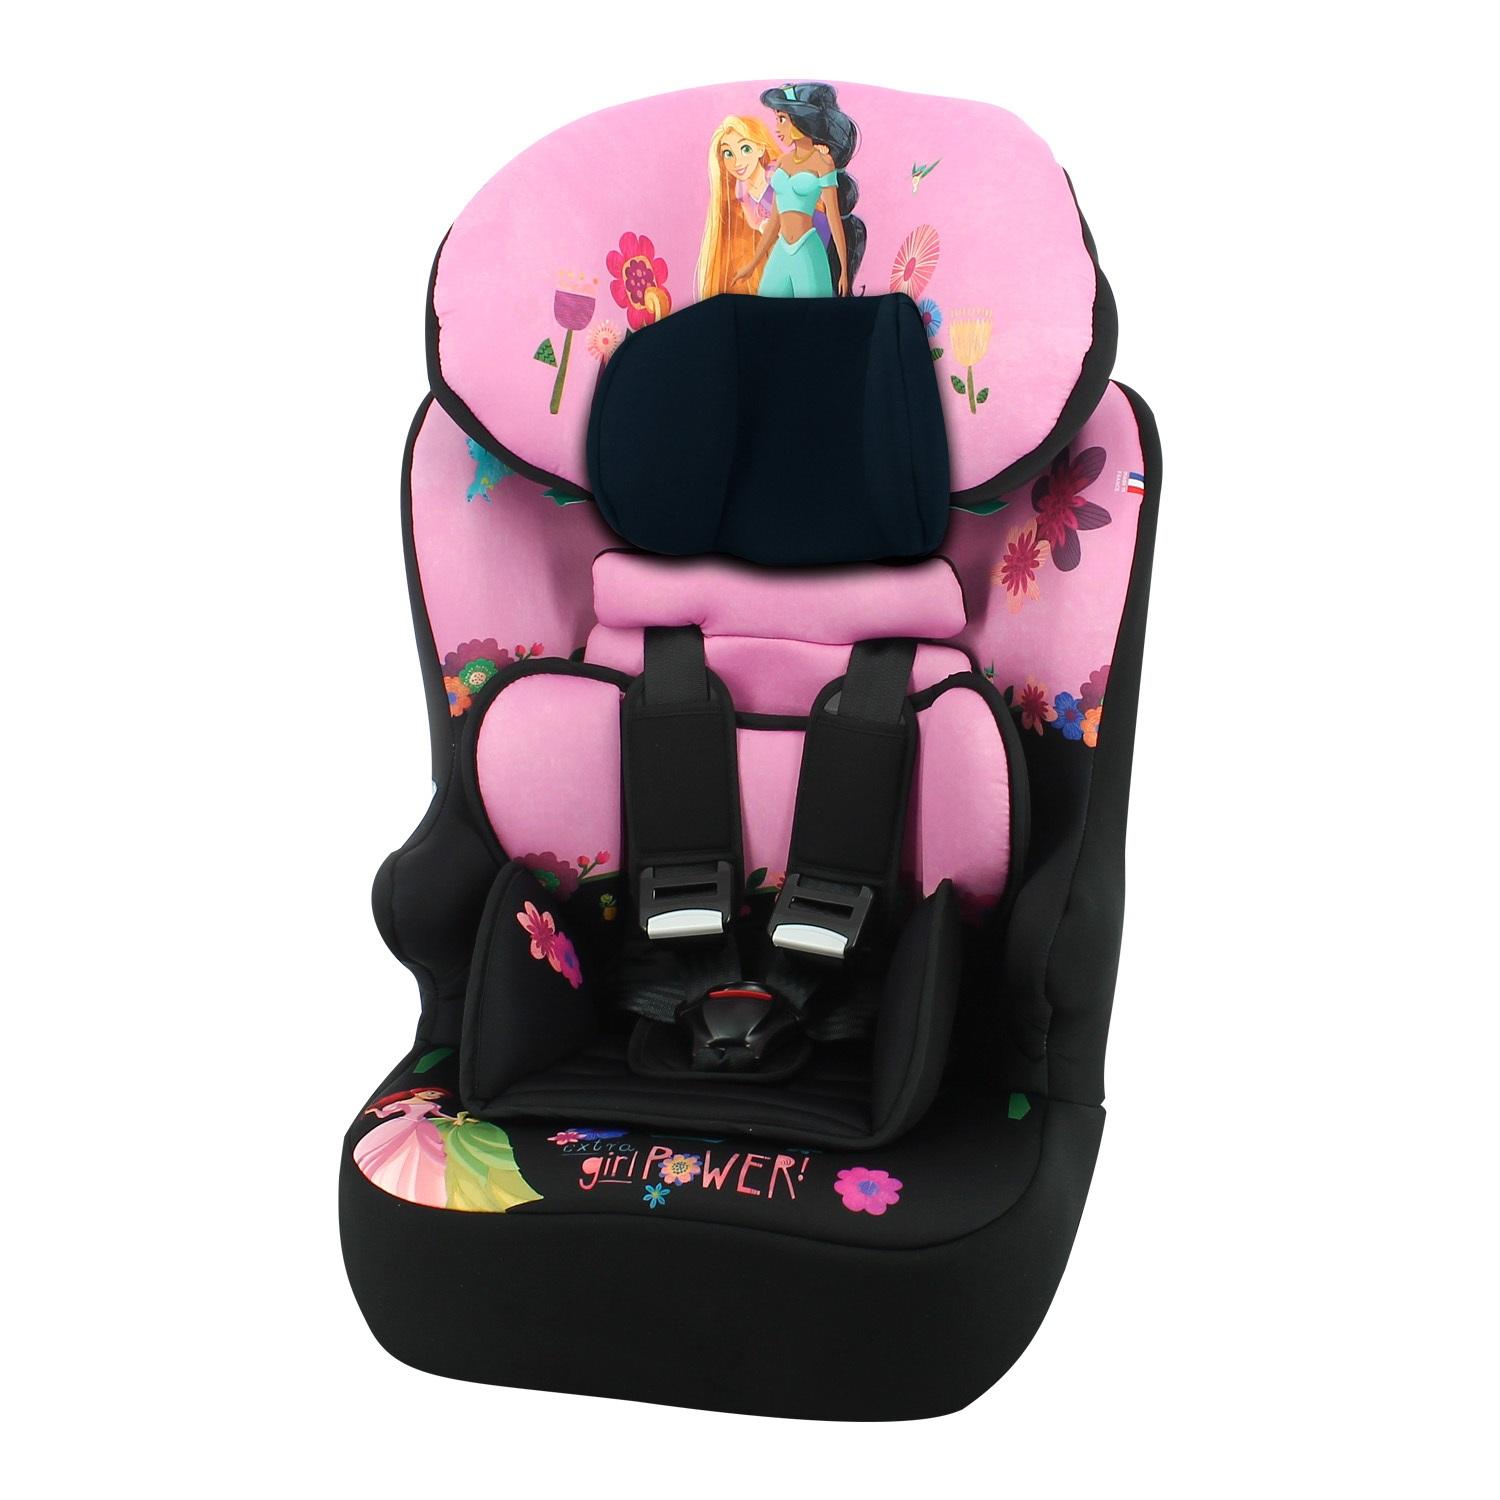 Disney Princess Race I Belt fitted 76-140cm (9 months to 12 years) High Back Booster Car Seat - 8301010176